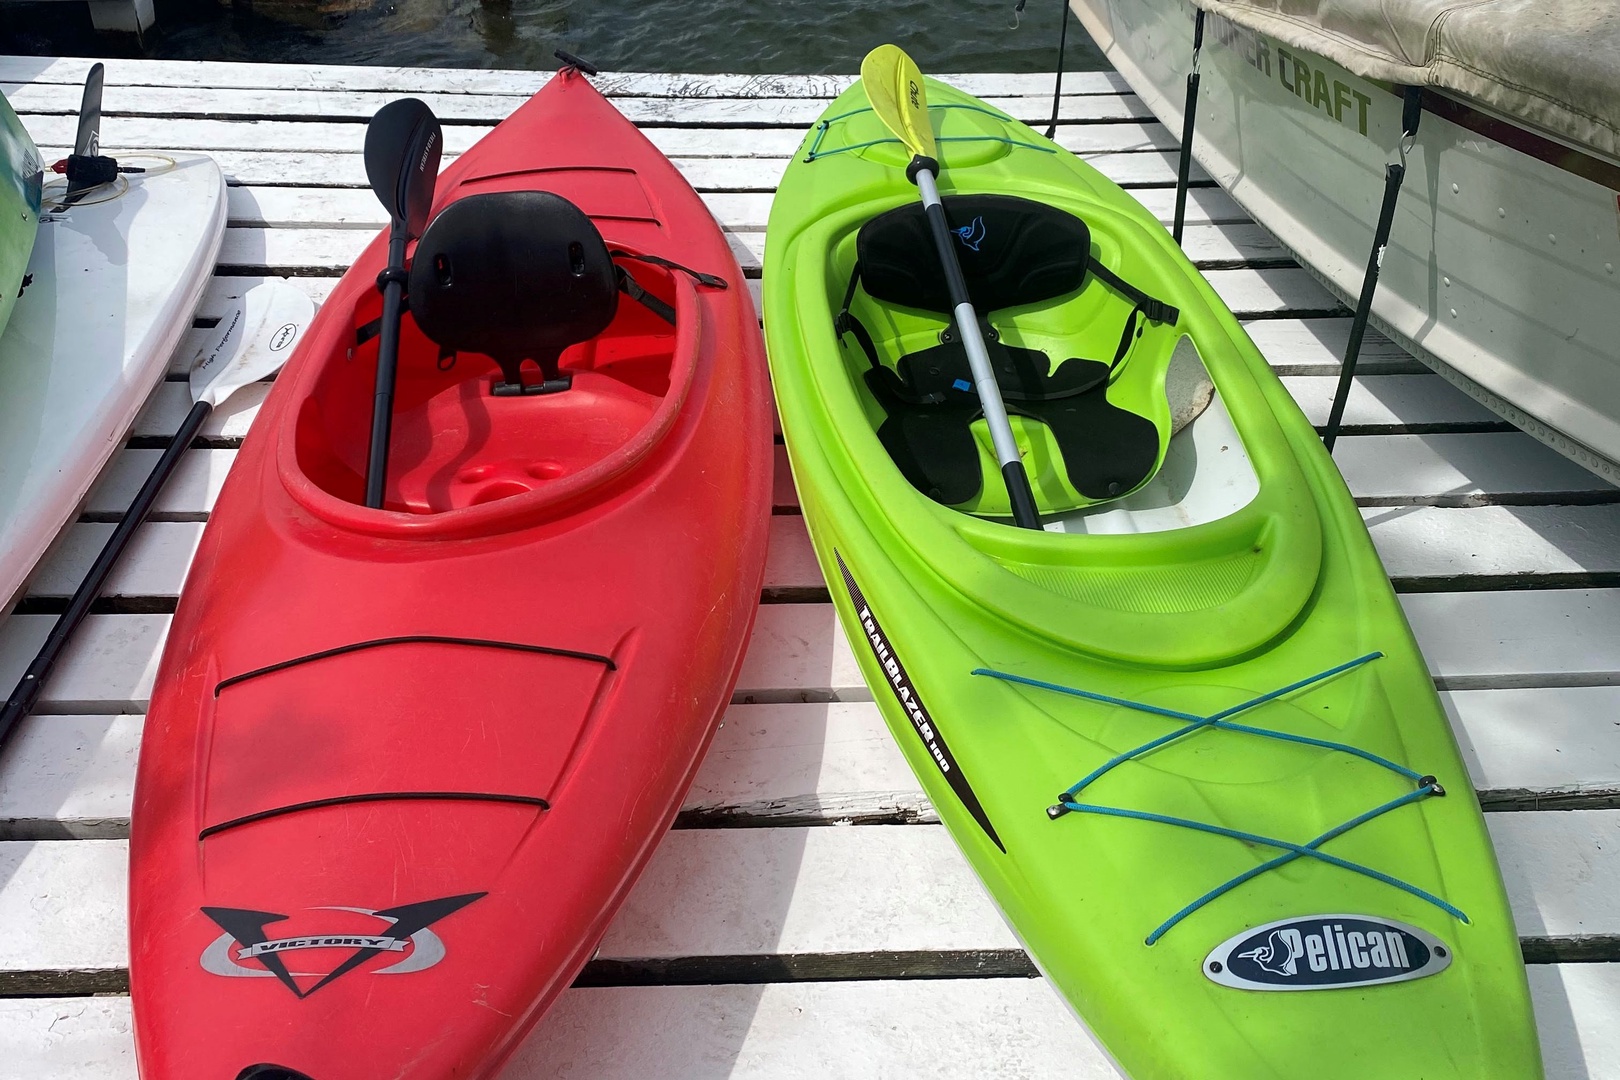 Kayaks are also accessible for use during your stay (waiver must be signed)